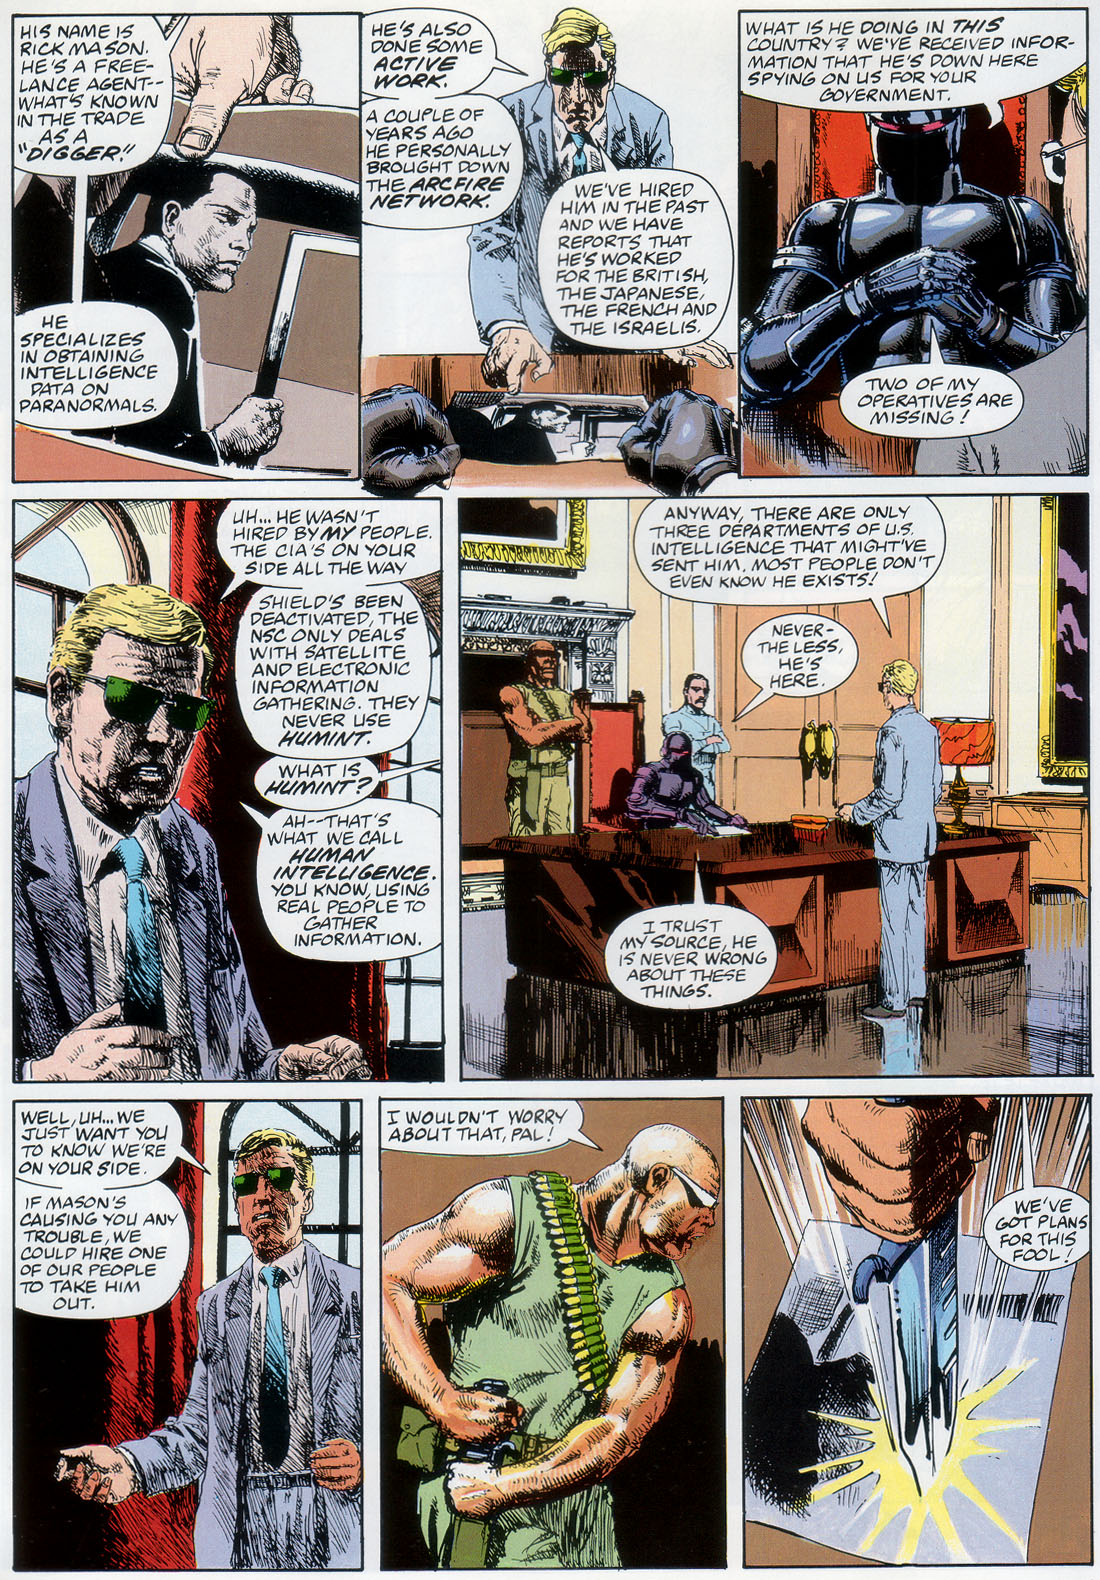 Marvel Graphic Novel issue 57 - Rick Mason - The Agent - Page 46